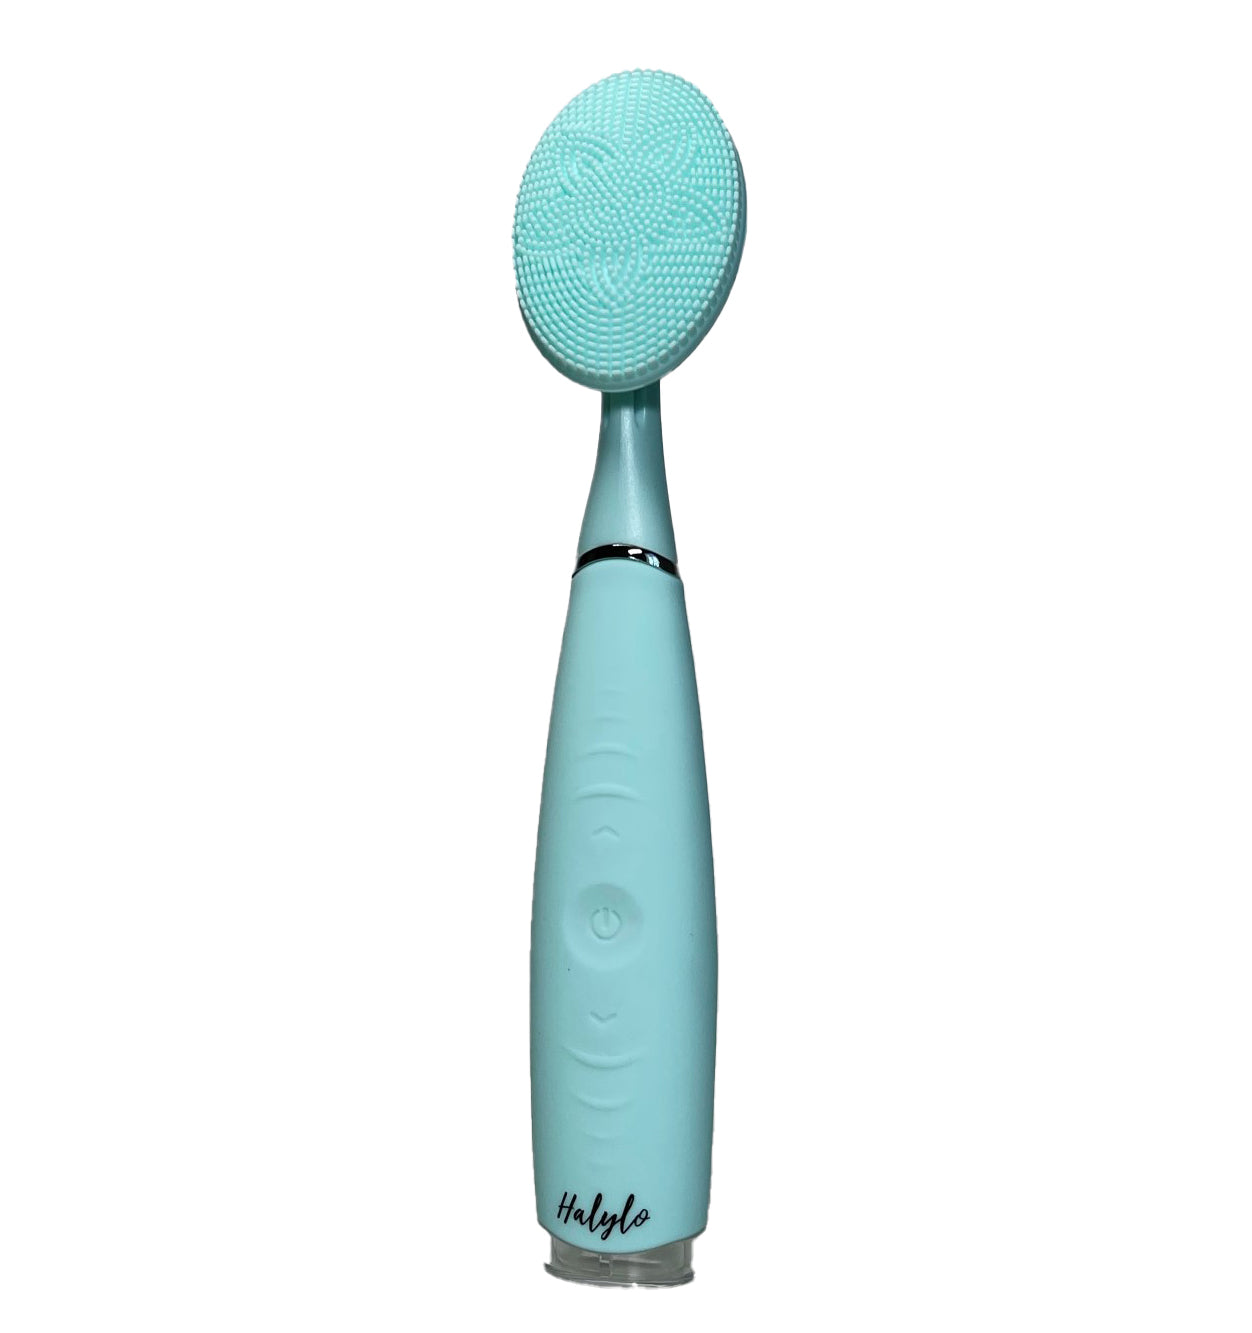 Sonic Facial Cleansing Brush For A Deep Clean and Massage – Halylo